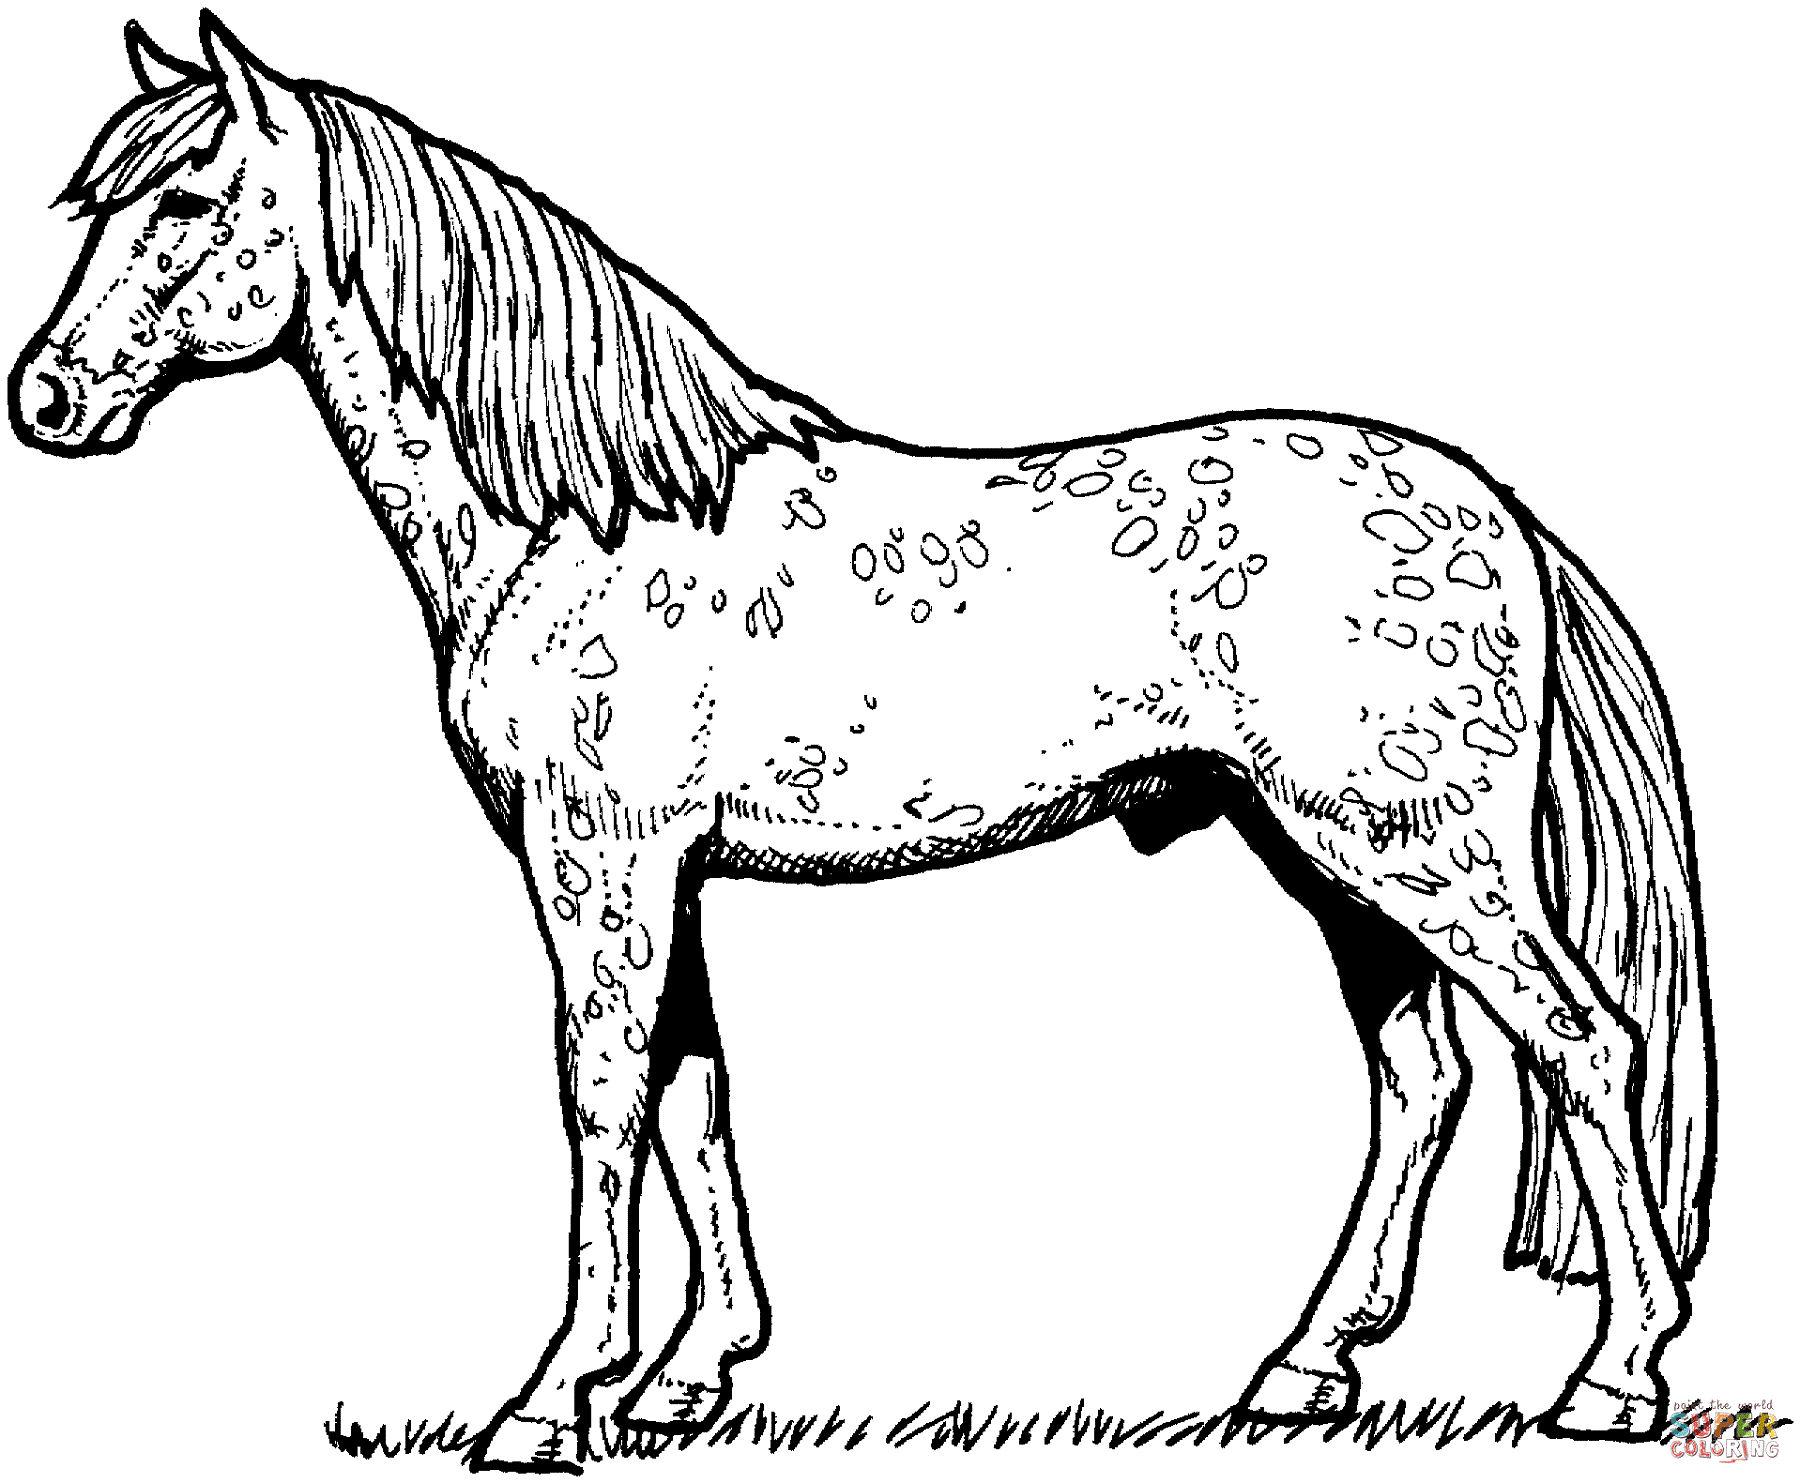 coloring pages barbie horse stable